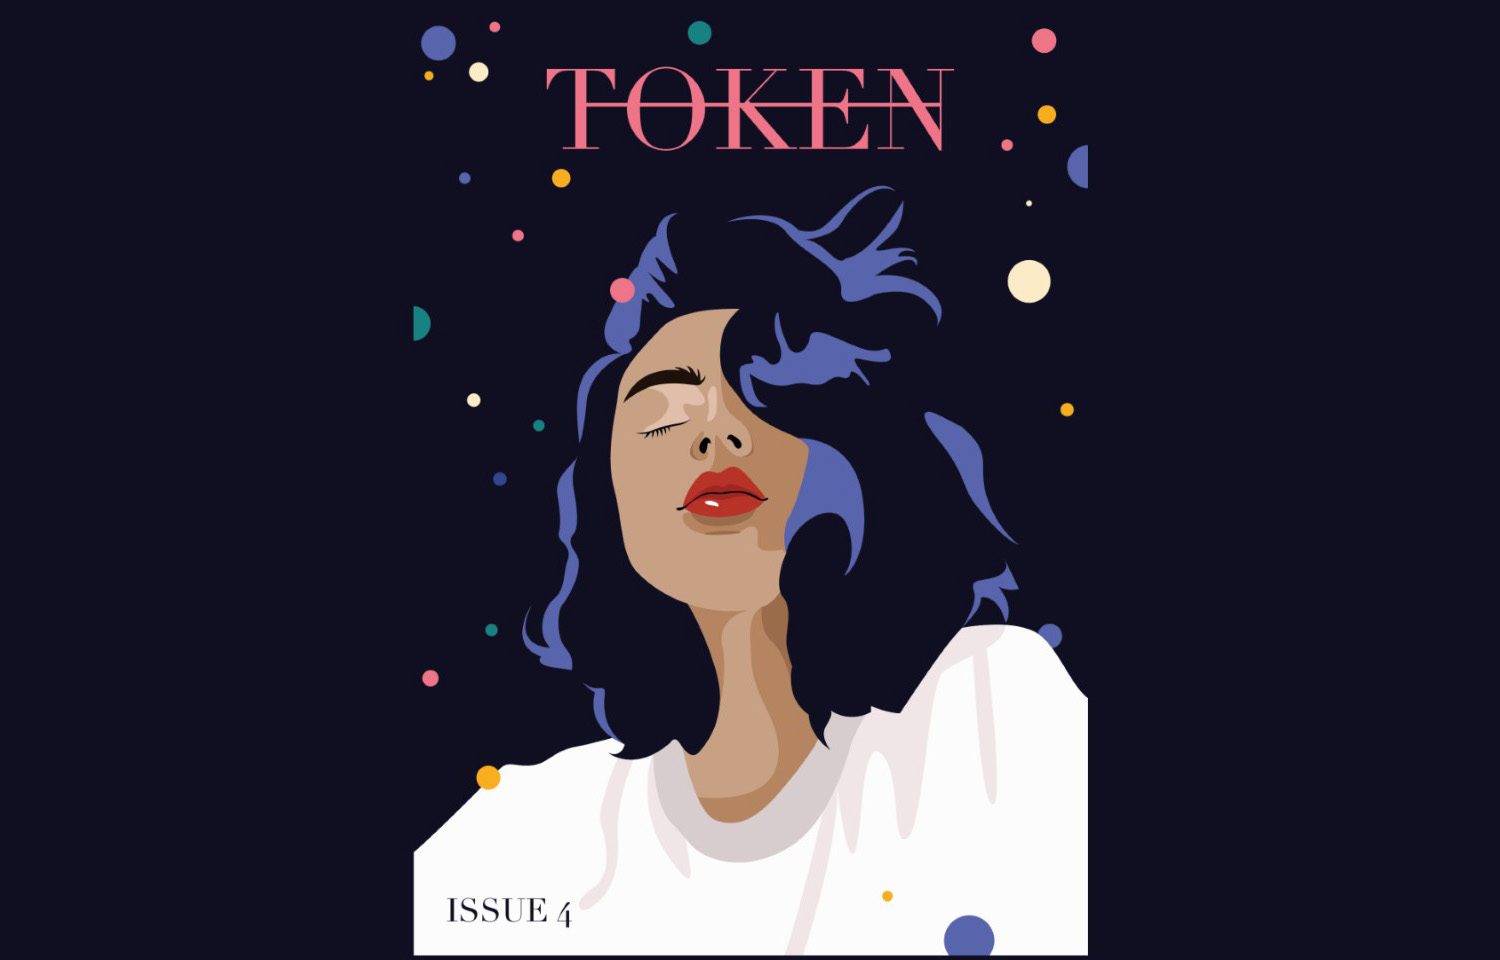 Token Magazine Issue 4 cover, with illustration of person with eyes closed